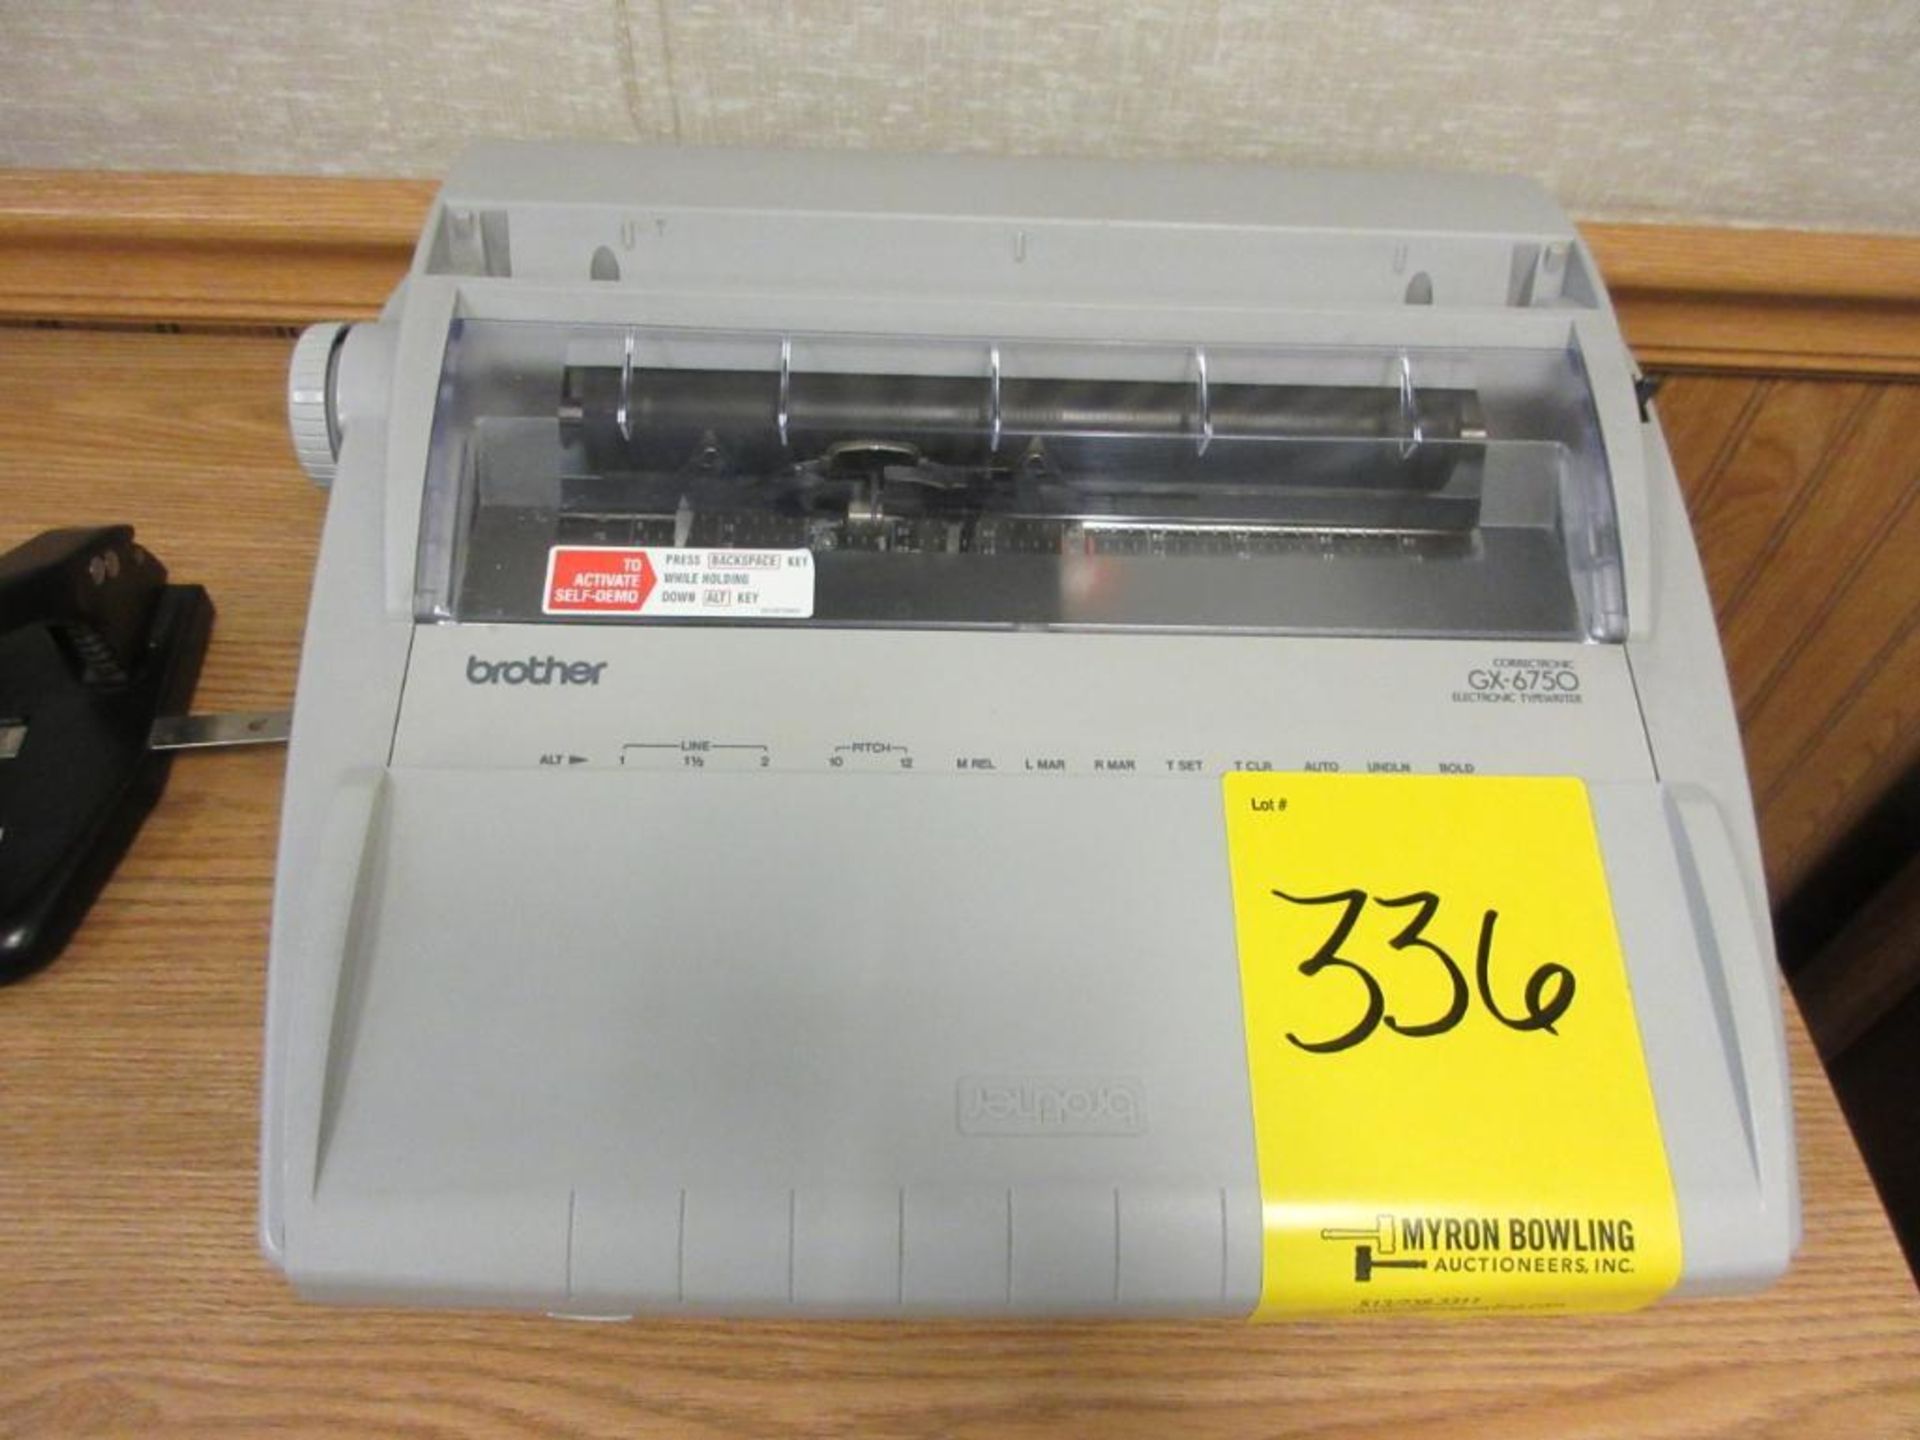 ELECTRONICS IN OFFICE: OKI PRINTER, BROTHER ELECTRONIC TYPEWRITER (X3), BUSINESS CLASS LASER FAX, - Image 7 of 8